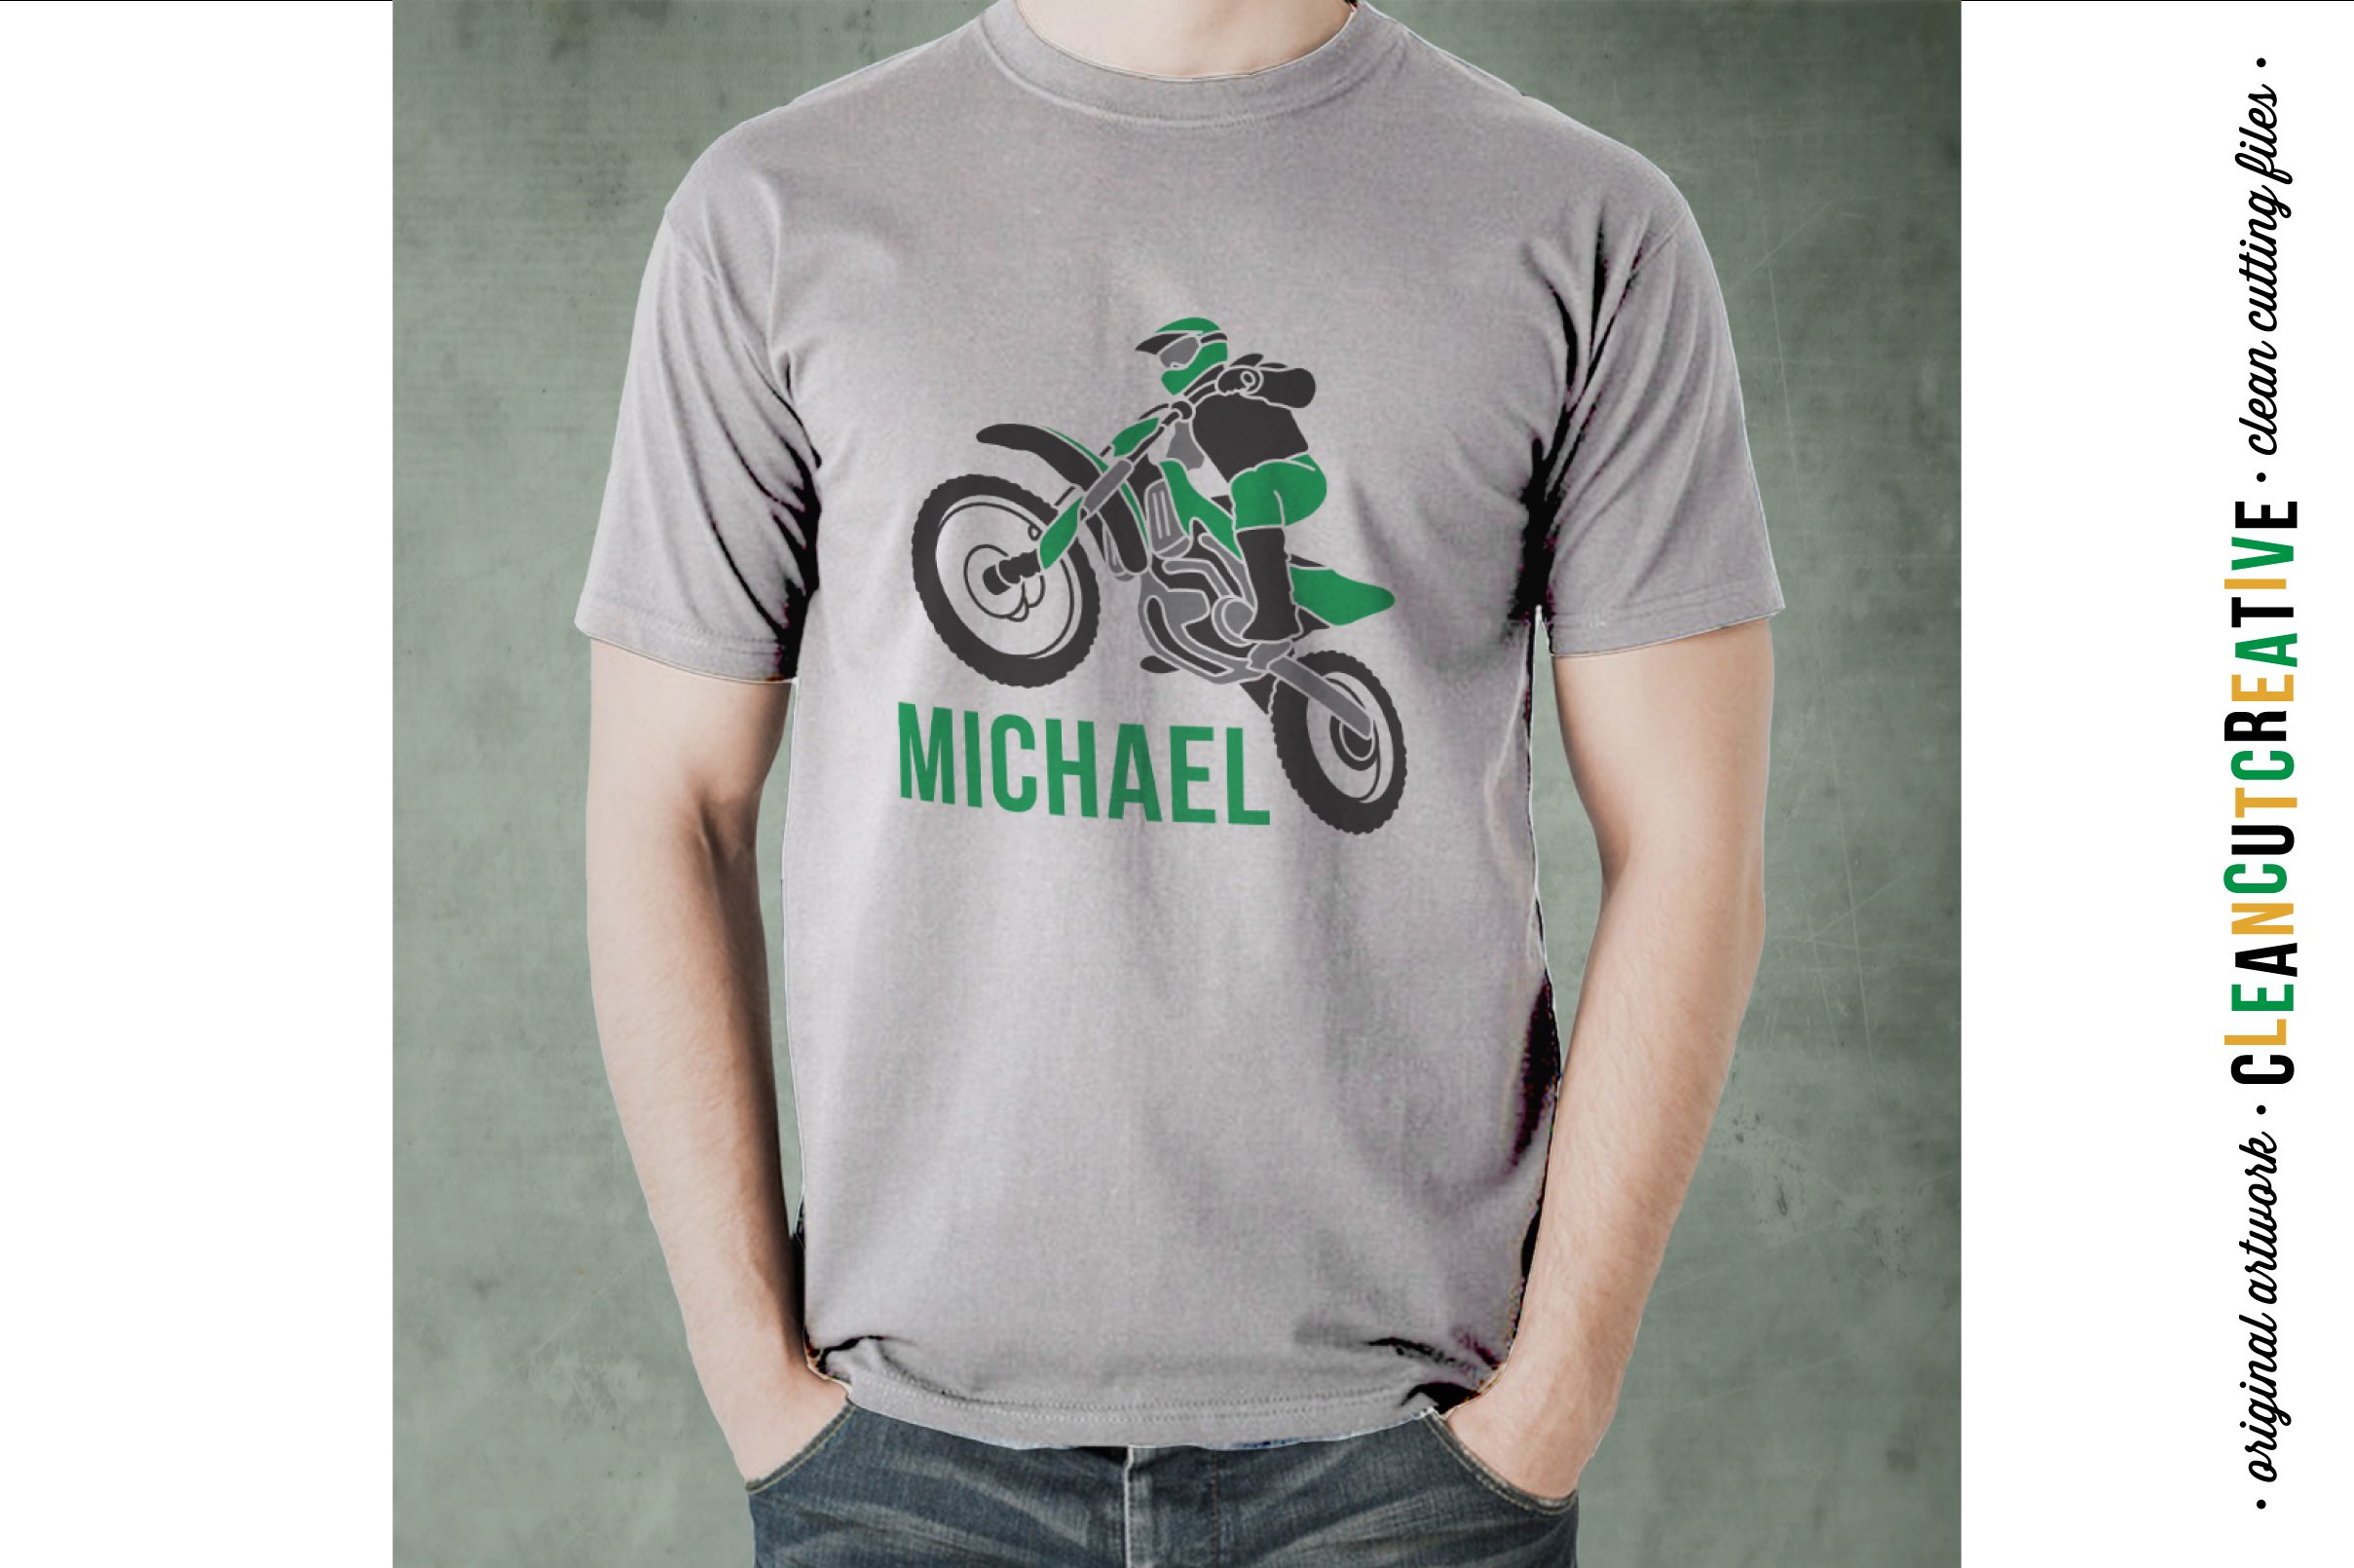 T-shirt image with a motorcyclist.